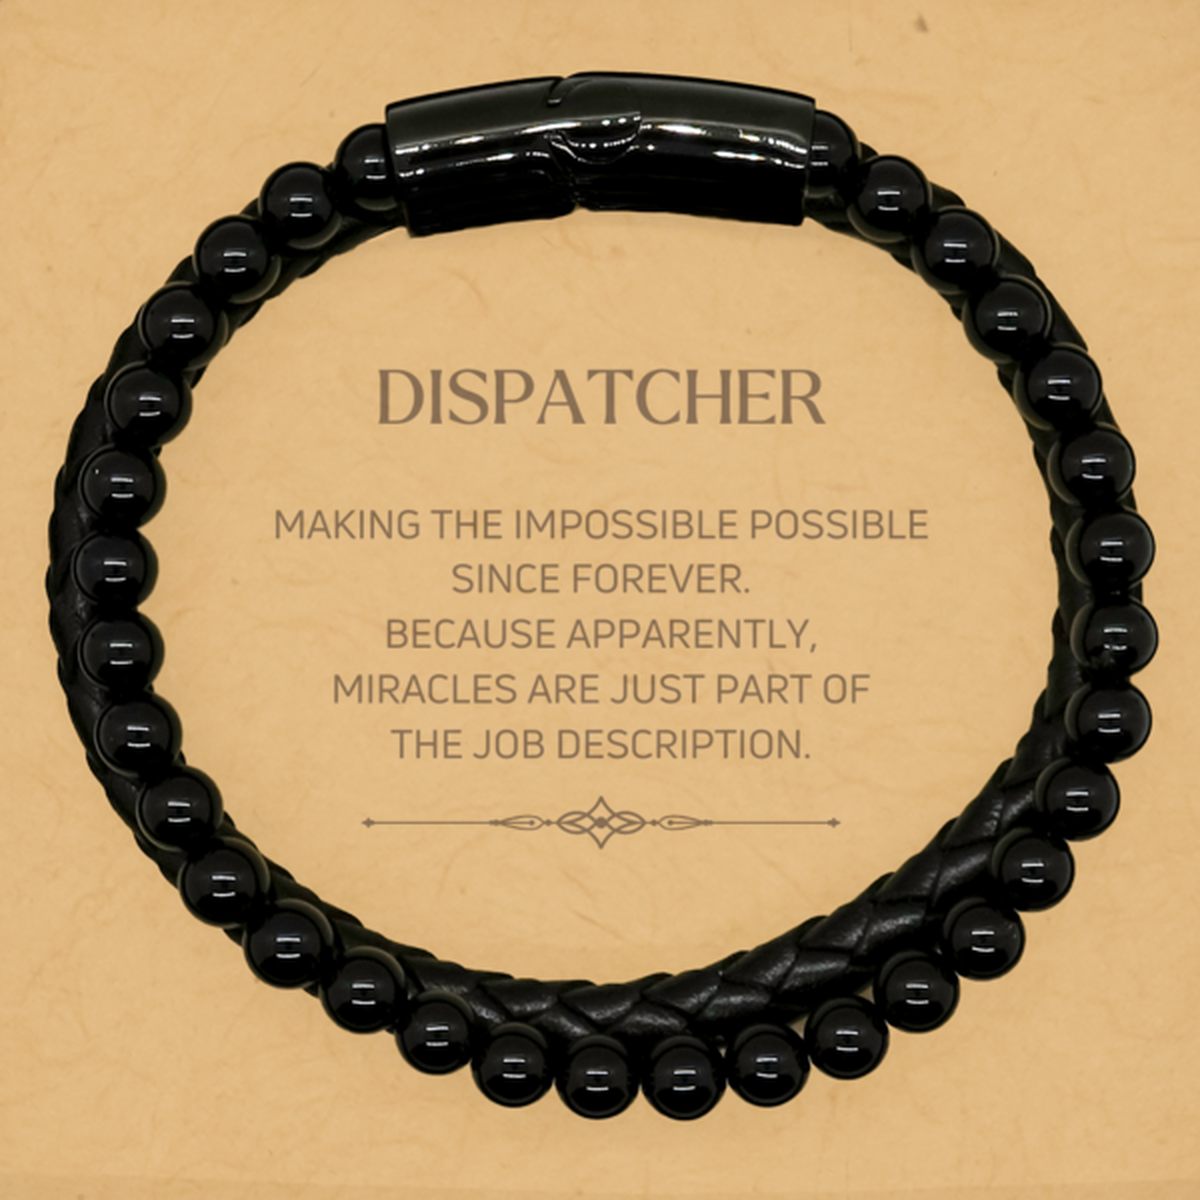 Funny Dispatcher Gifts, Miracles are just part of the job description, Inspirational Birthday Stone Leather Bracelets For Dispatcher, Men, Women, Coworkers, Friends, Boss